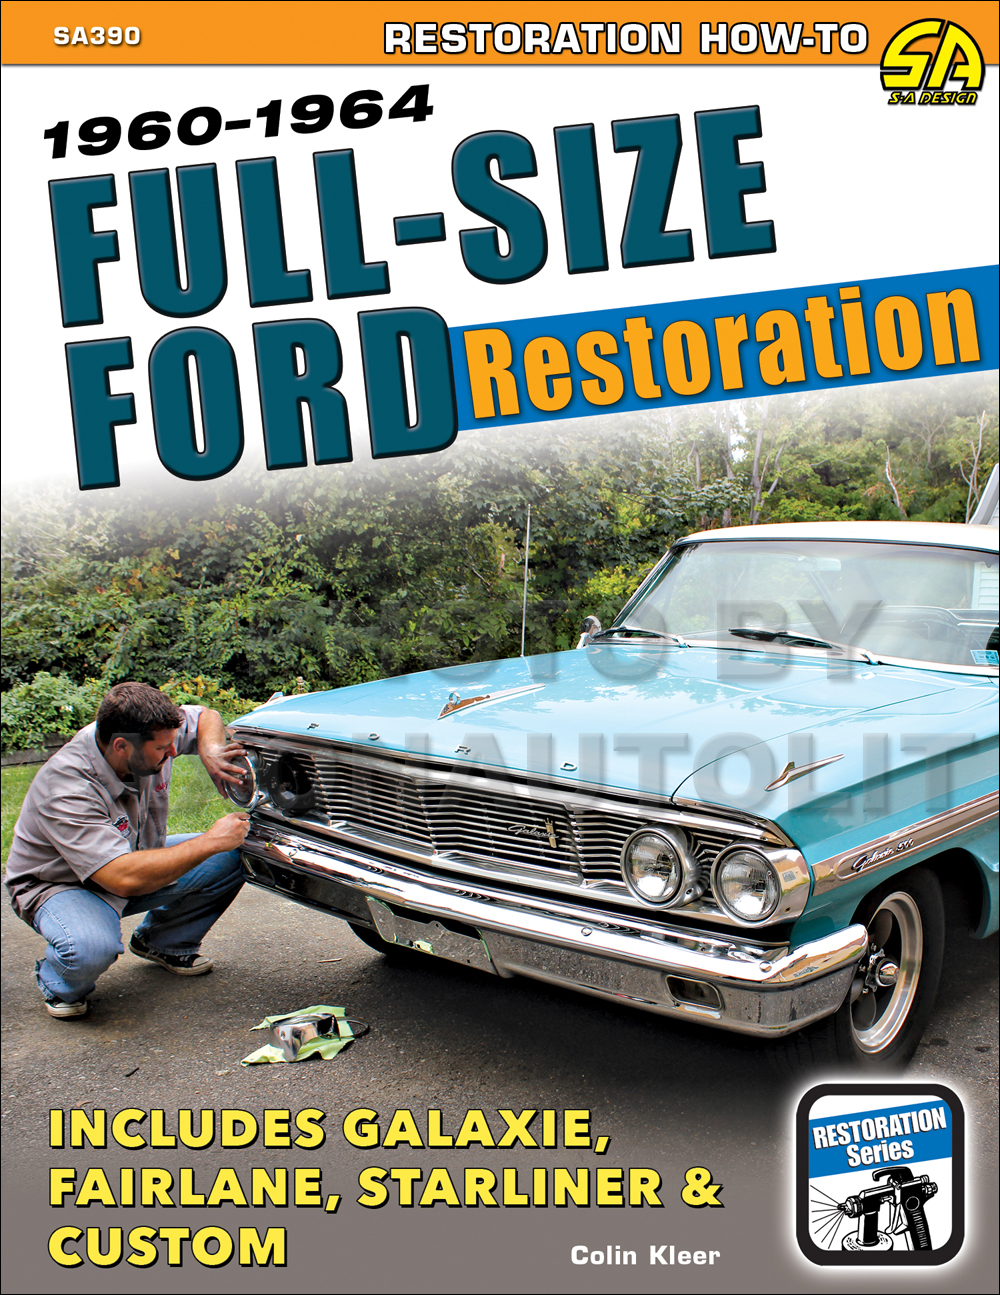 Full Size Ford Restoration Guide 1960-1964